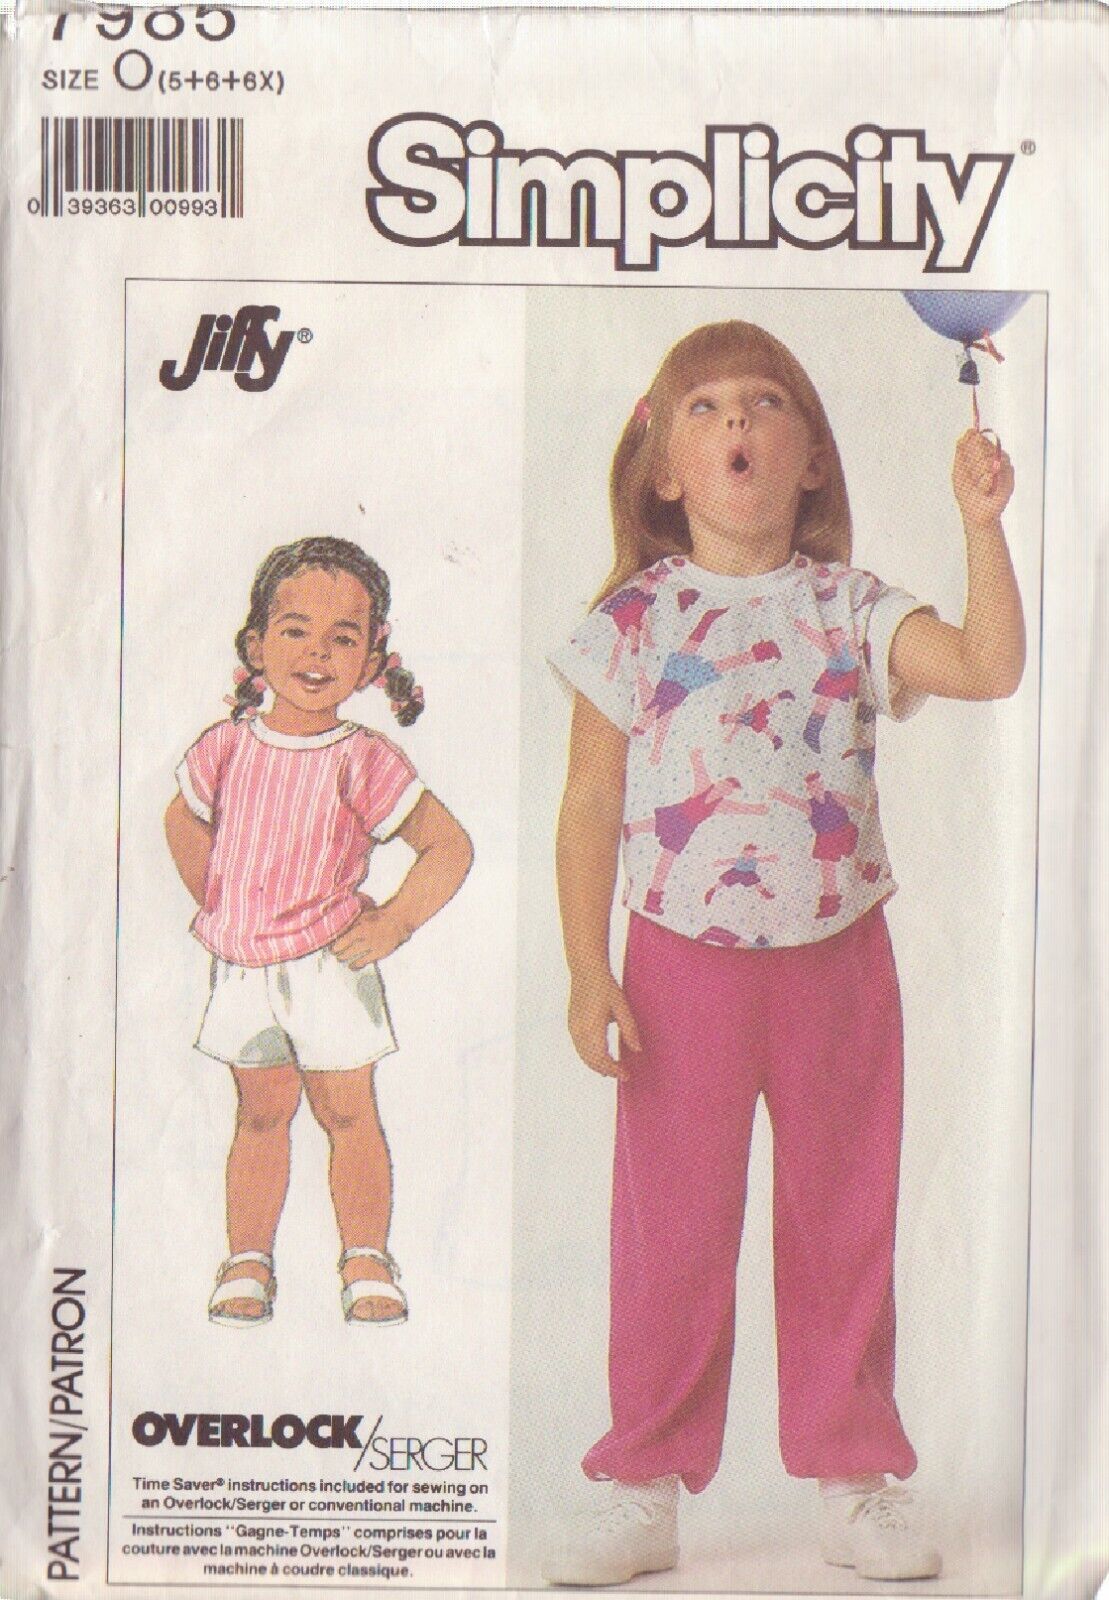 SIMPLICITY PATTERN 7985 SIZES 5 & 6 CHILD'S KNIT TOP, PULL ON PANTS, SHORTS - $3.00